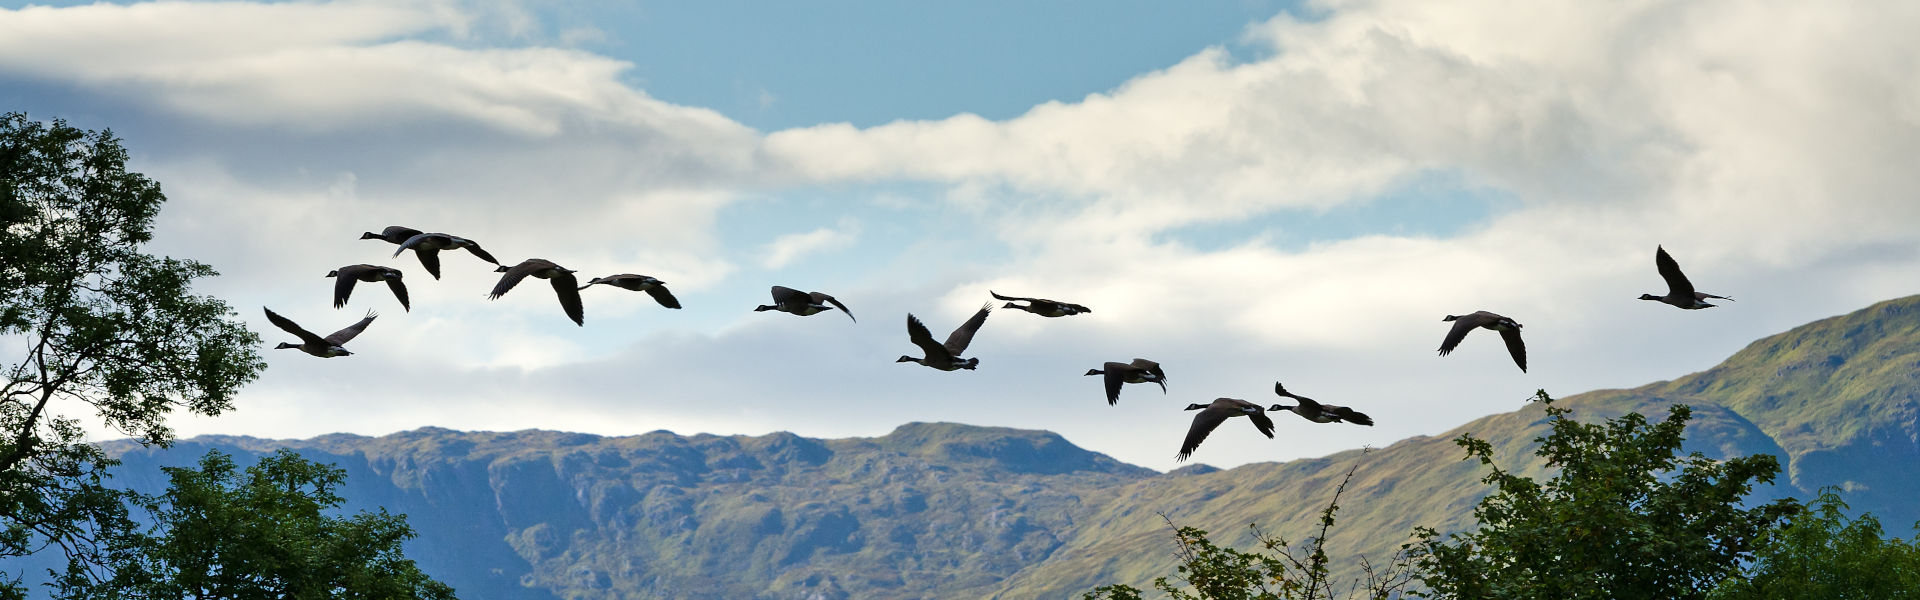 A flock of geese migrating on the west coast of Scotland